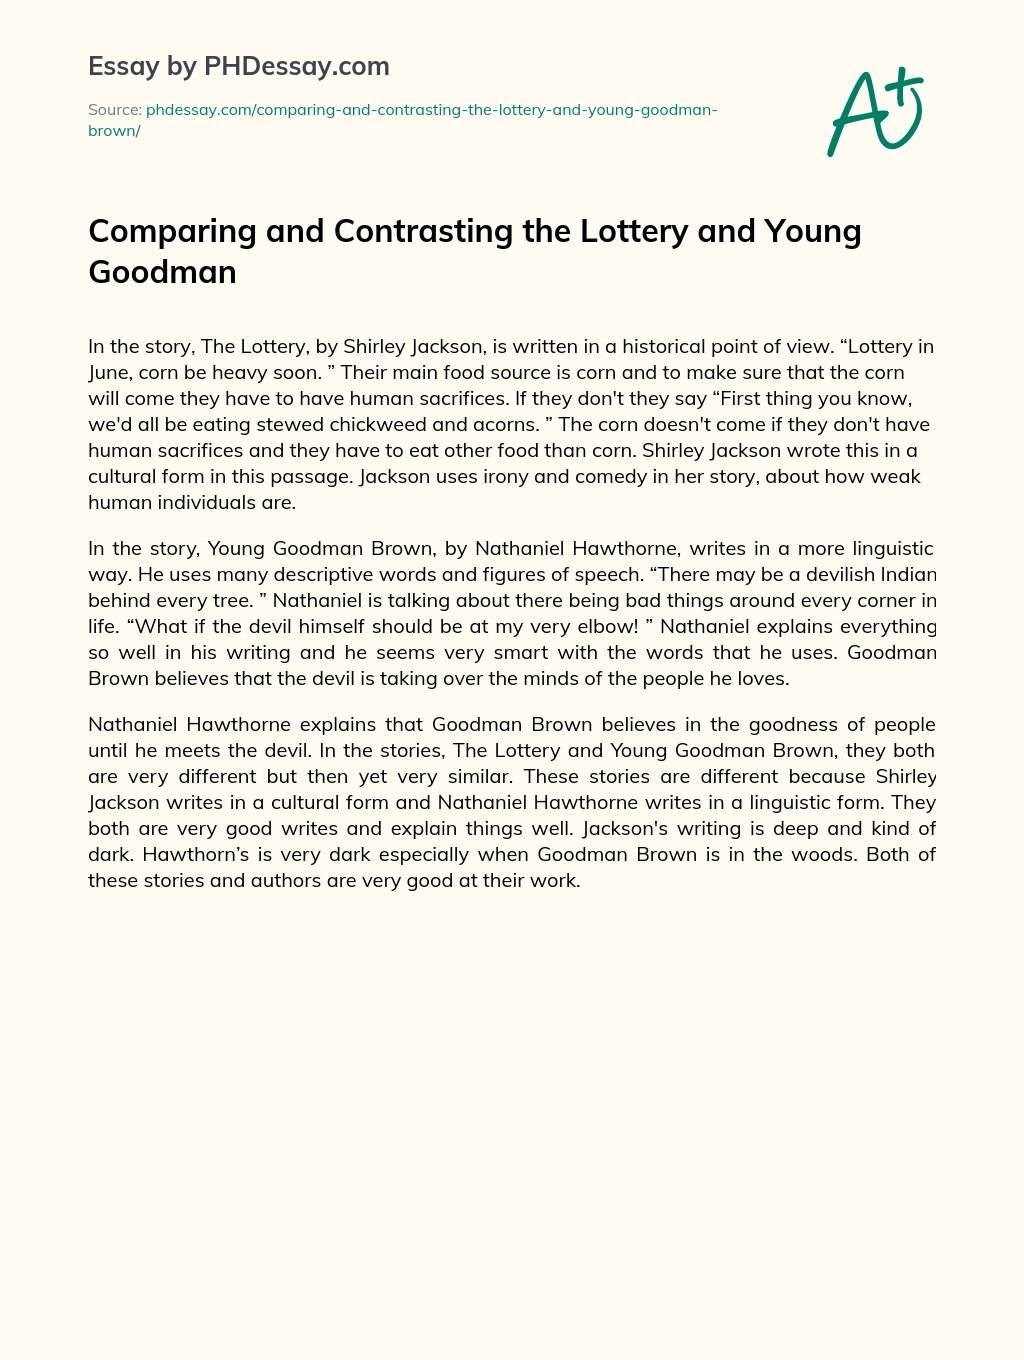 Comparing and Contrasting the Lottery and Young Goodman essay